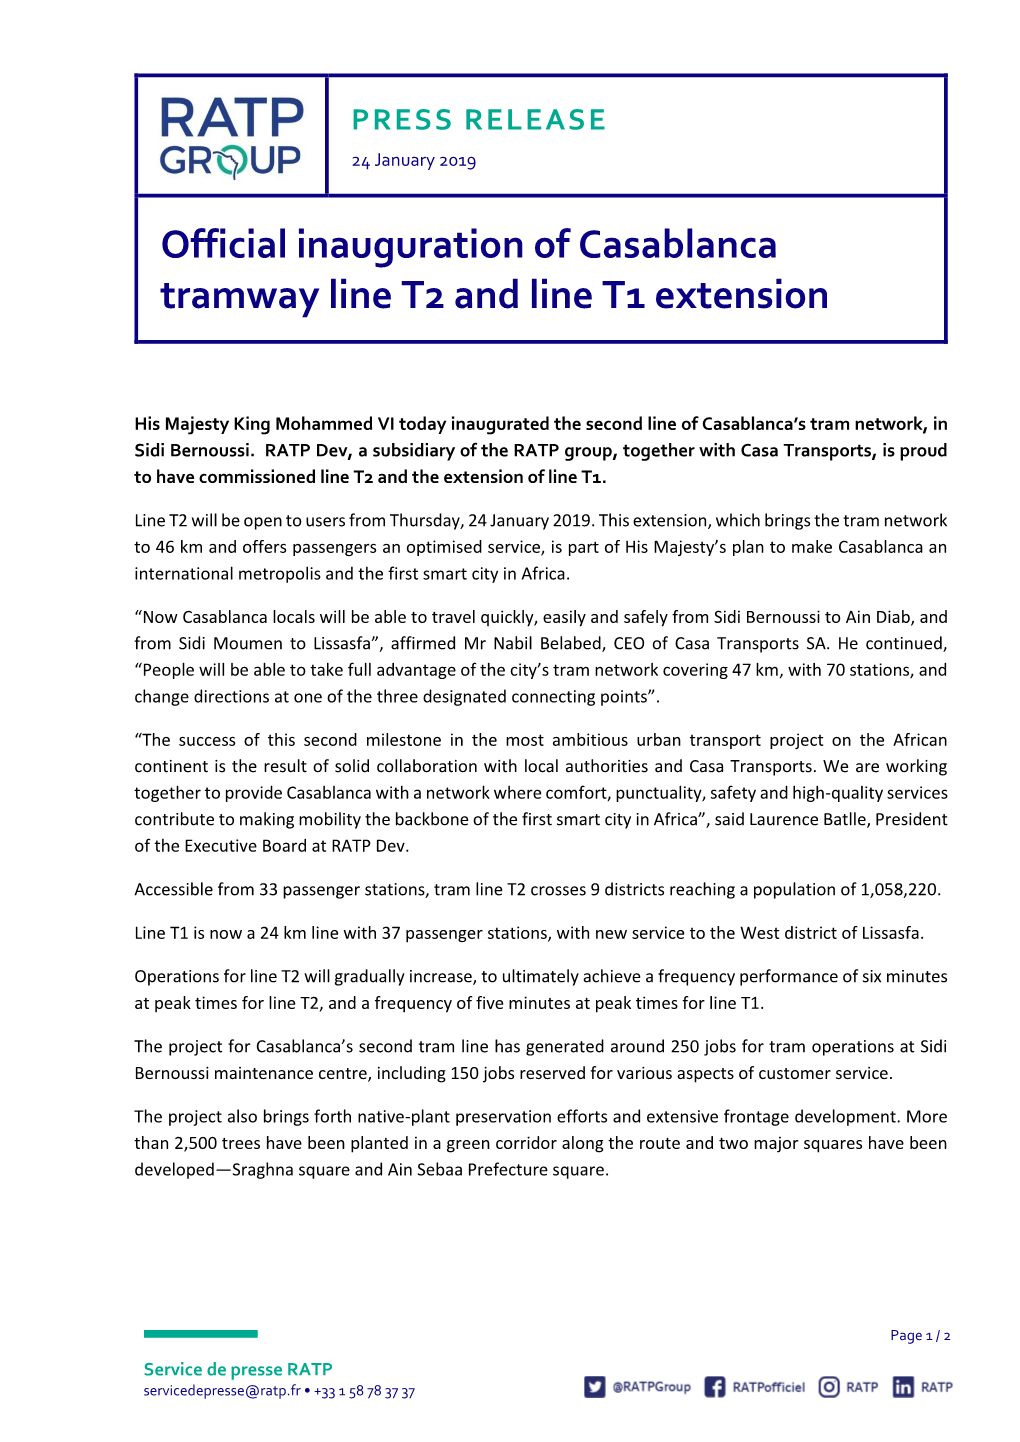 Official Inauguration of Casablanca Tramway Line T2 and Line T1 Extension